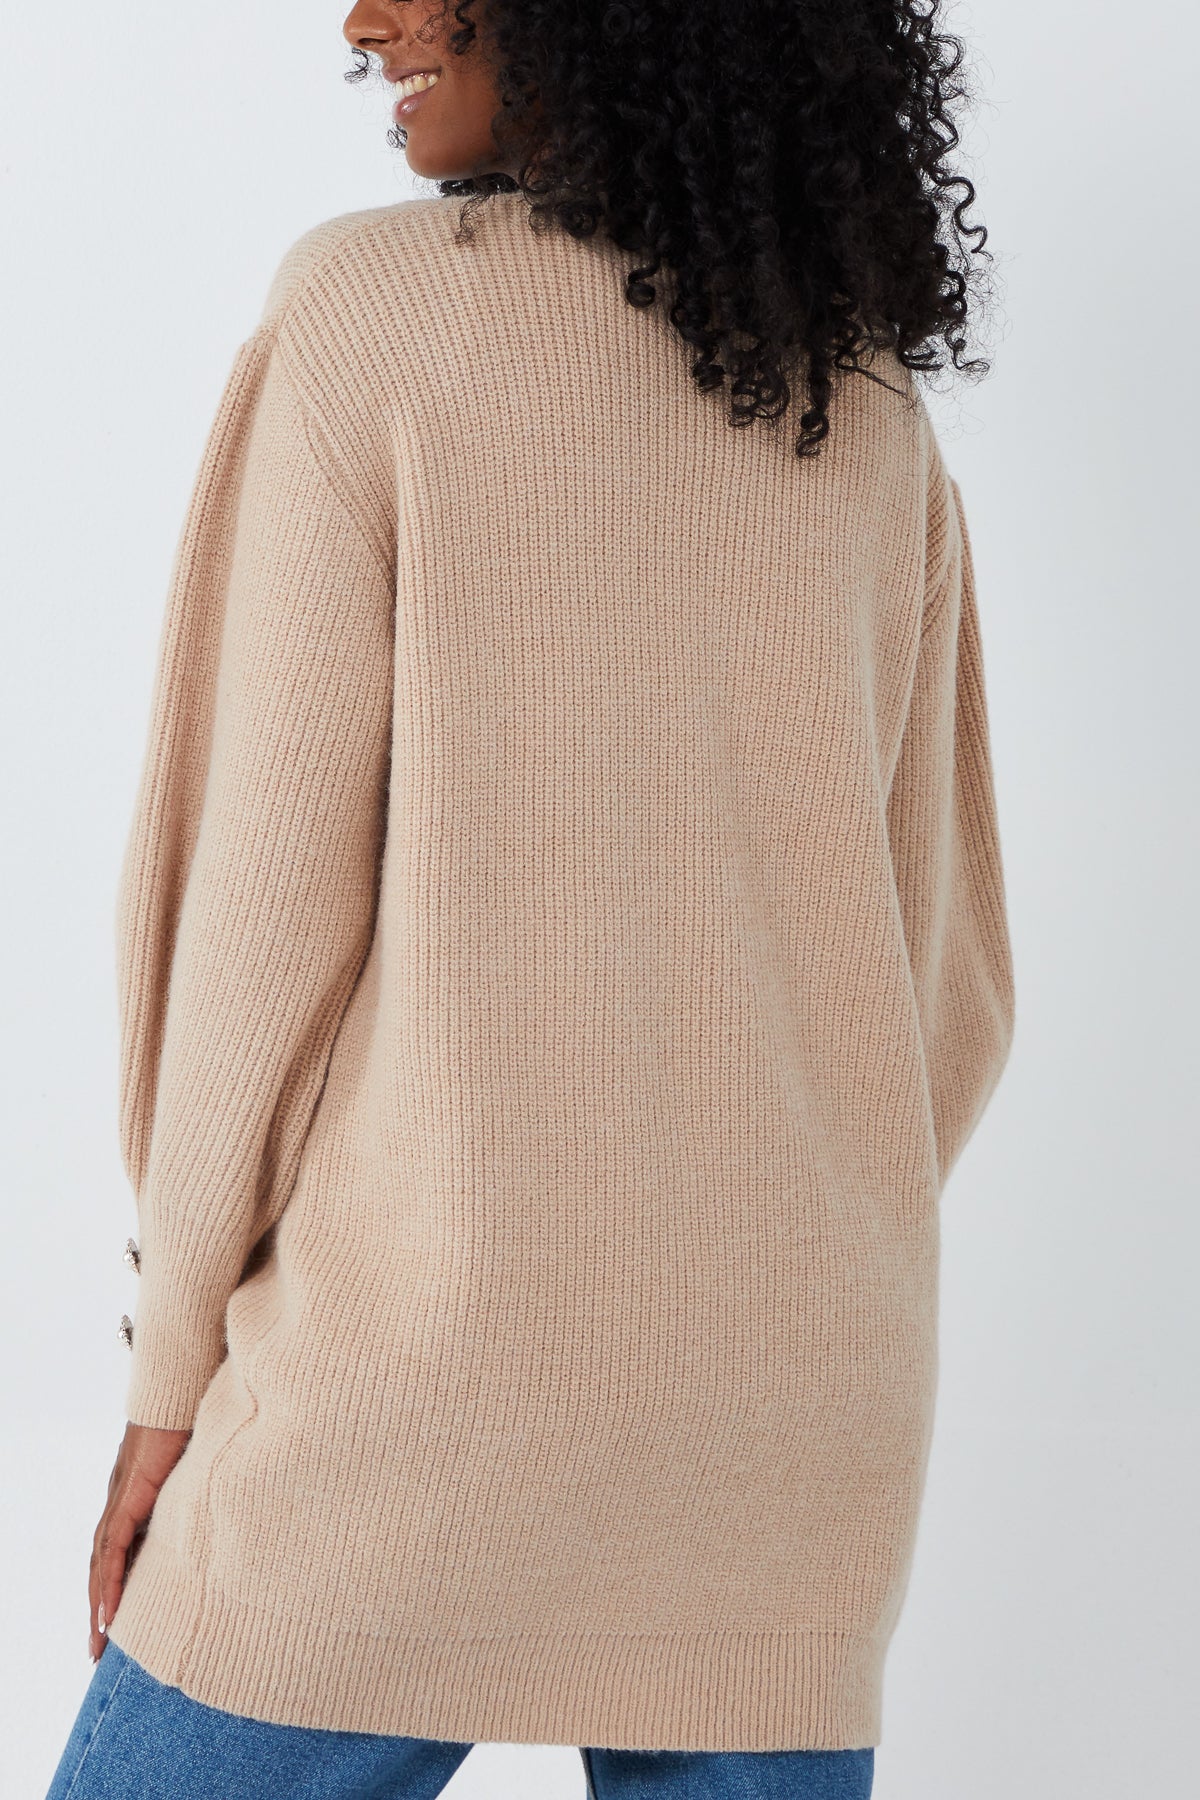 Pearl Button Long Line Cardigan